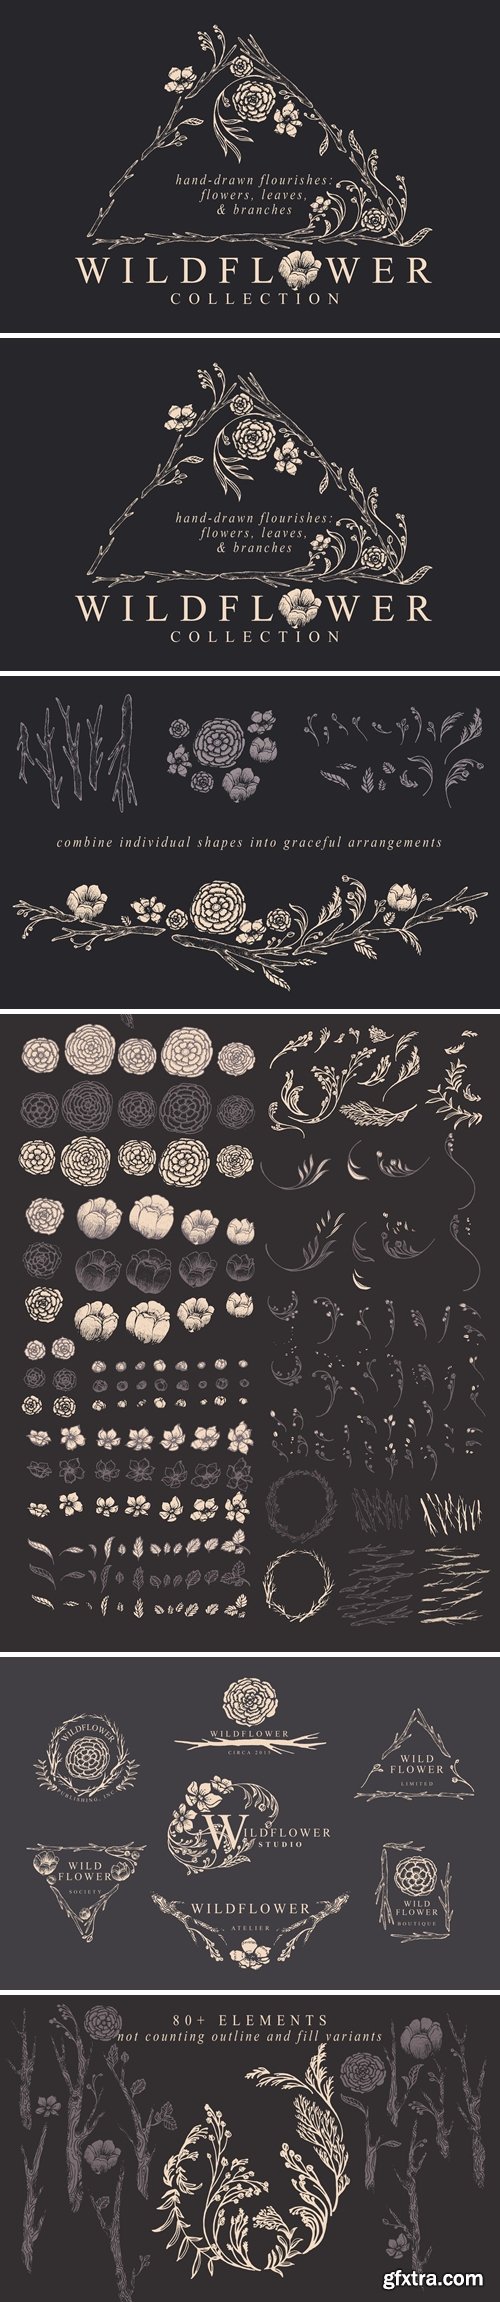 Wildflower Floral Illustrations & Templates